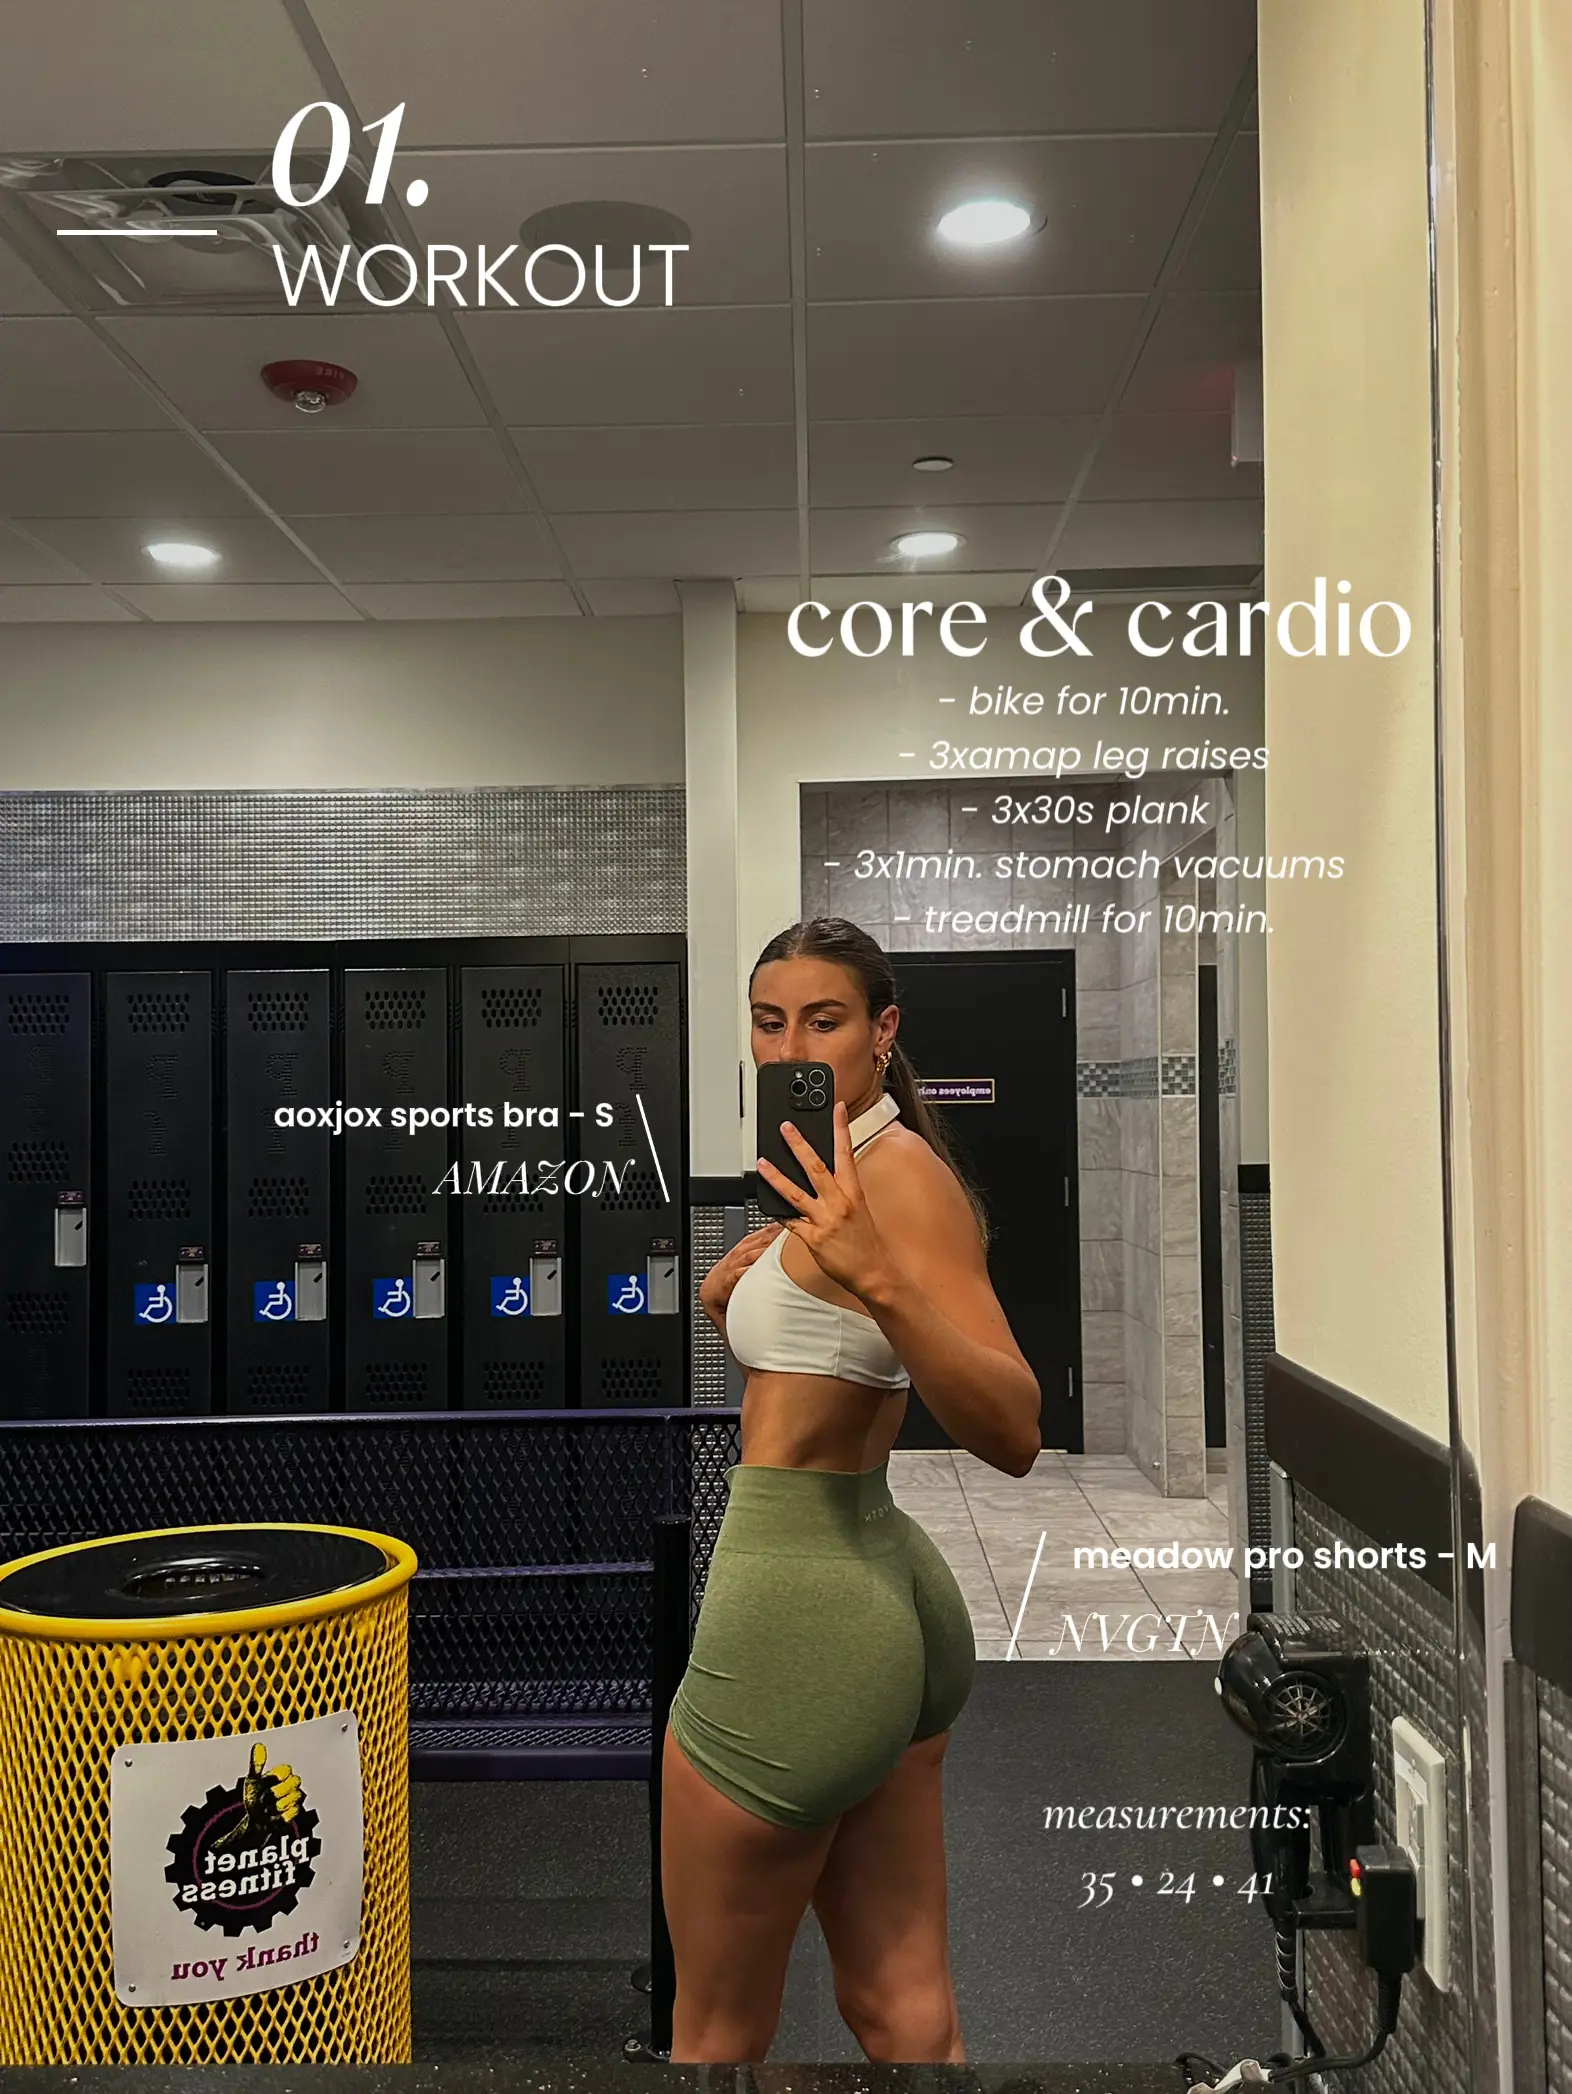  A woman is taking a selfie in a gym.